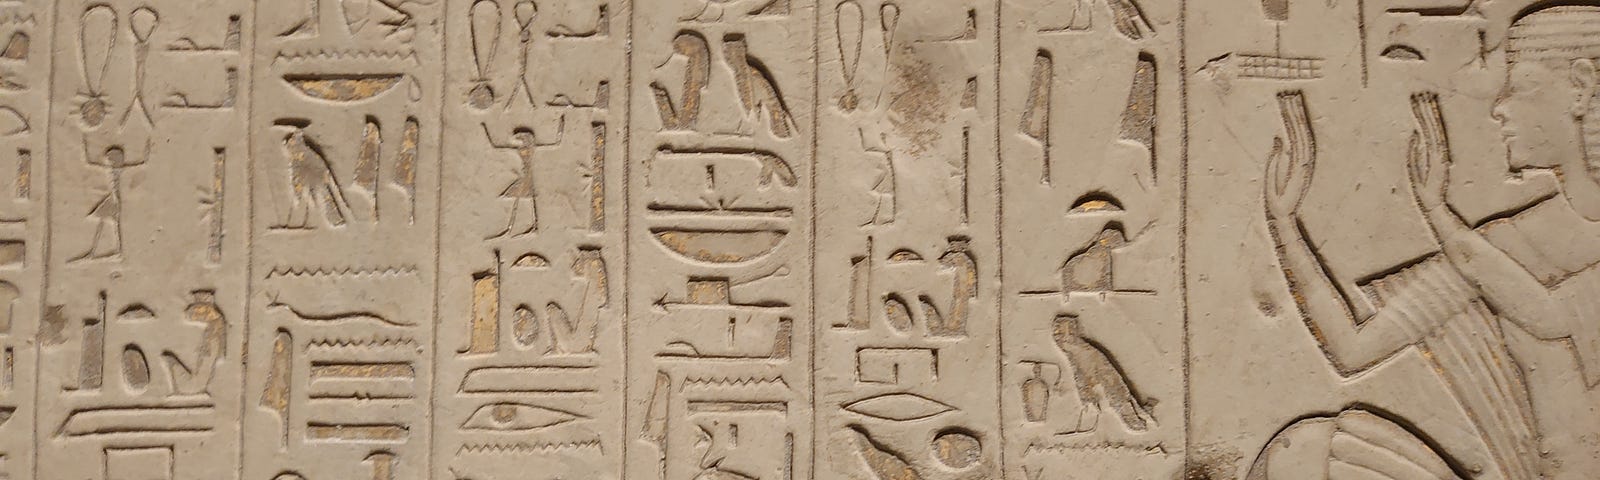 An image of hieroglyphs engraved on a wall